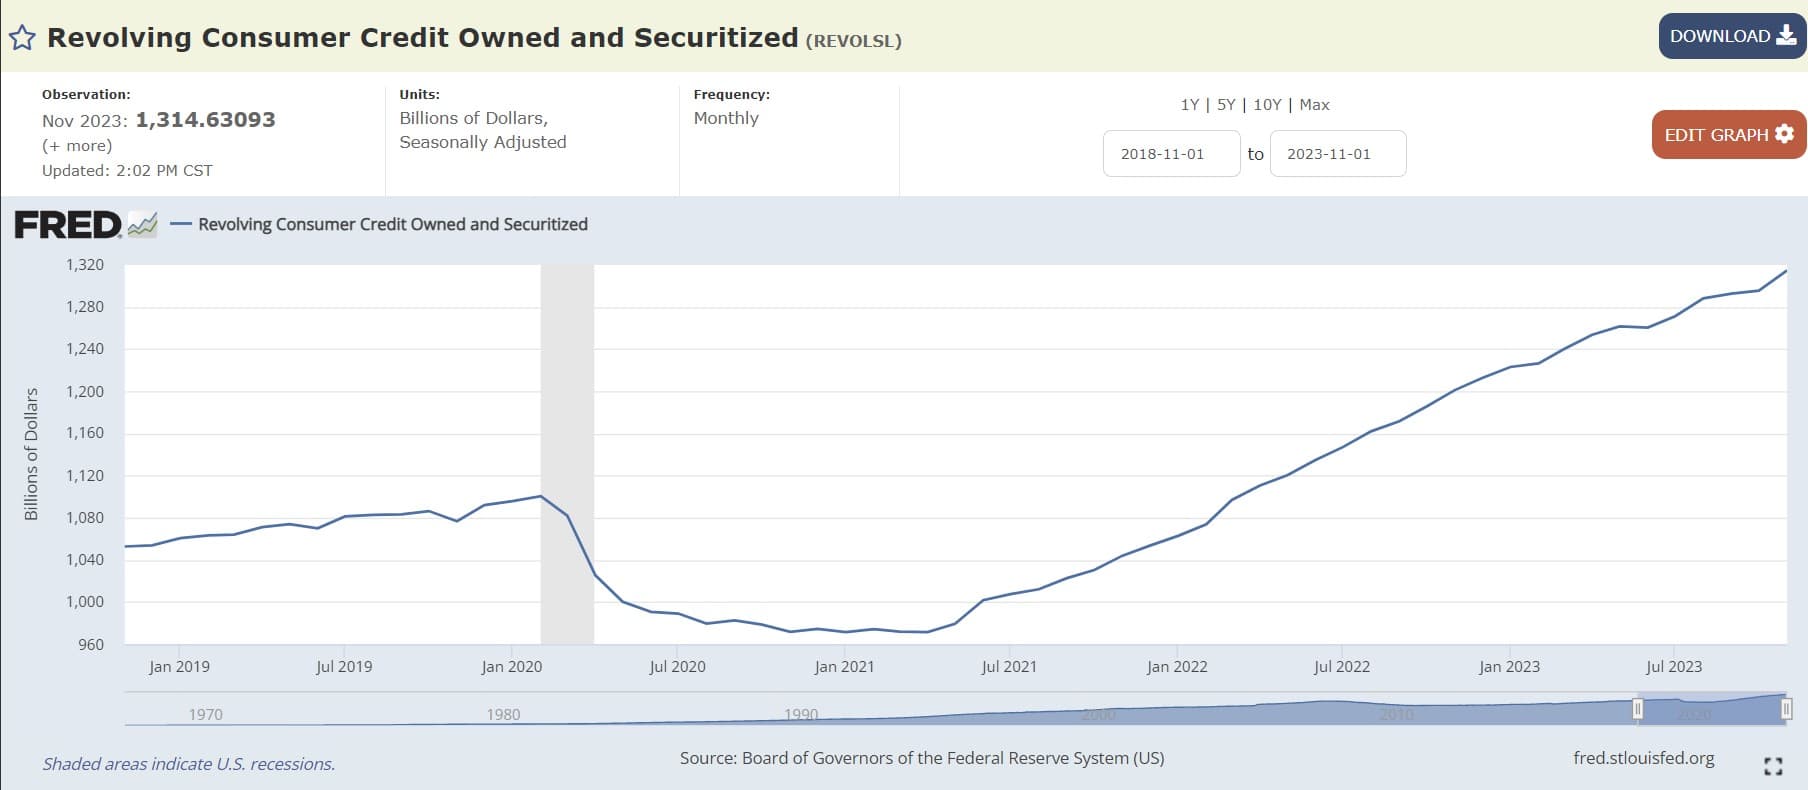  Revolving Consumer Credit Owned and Securitized